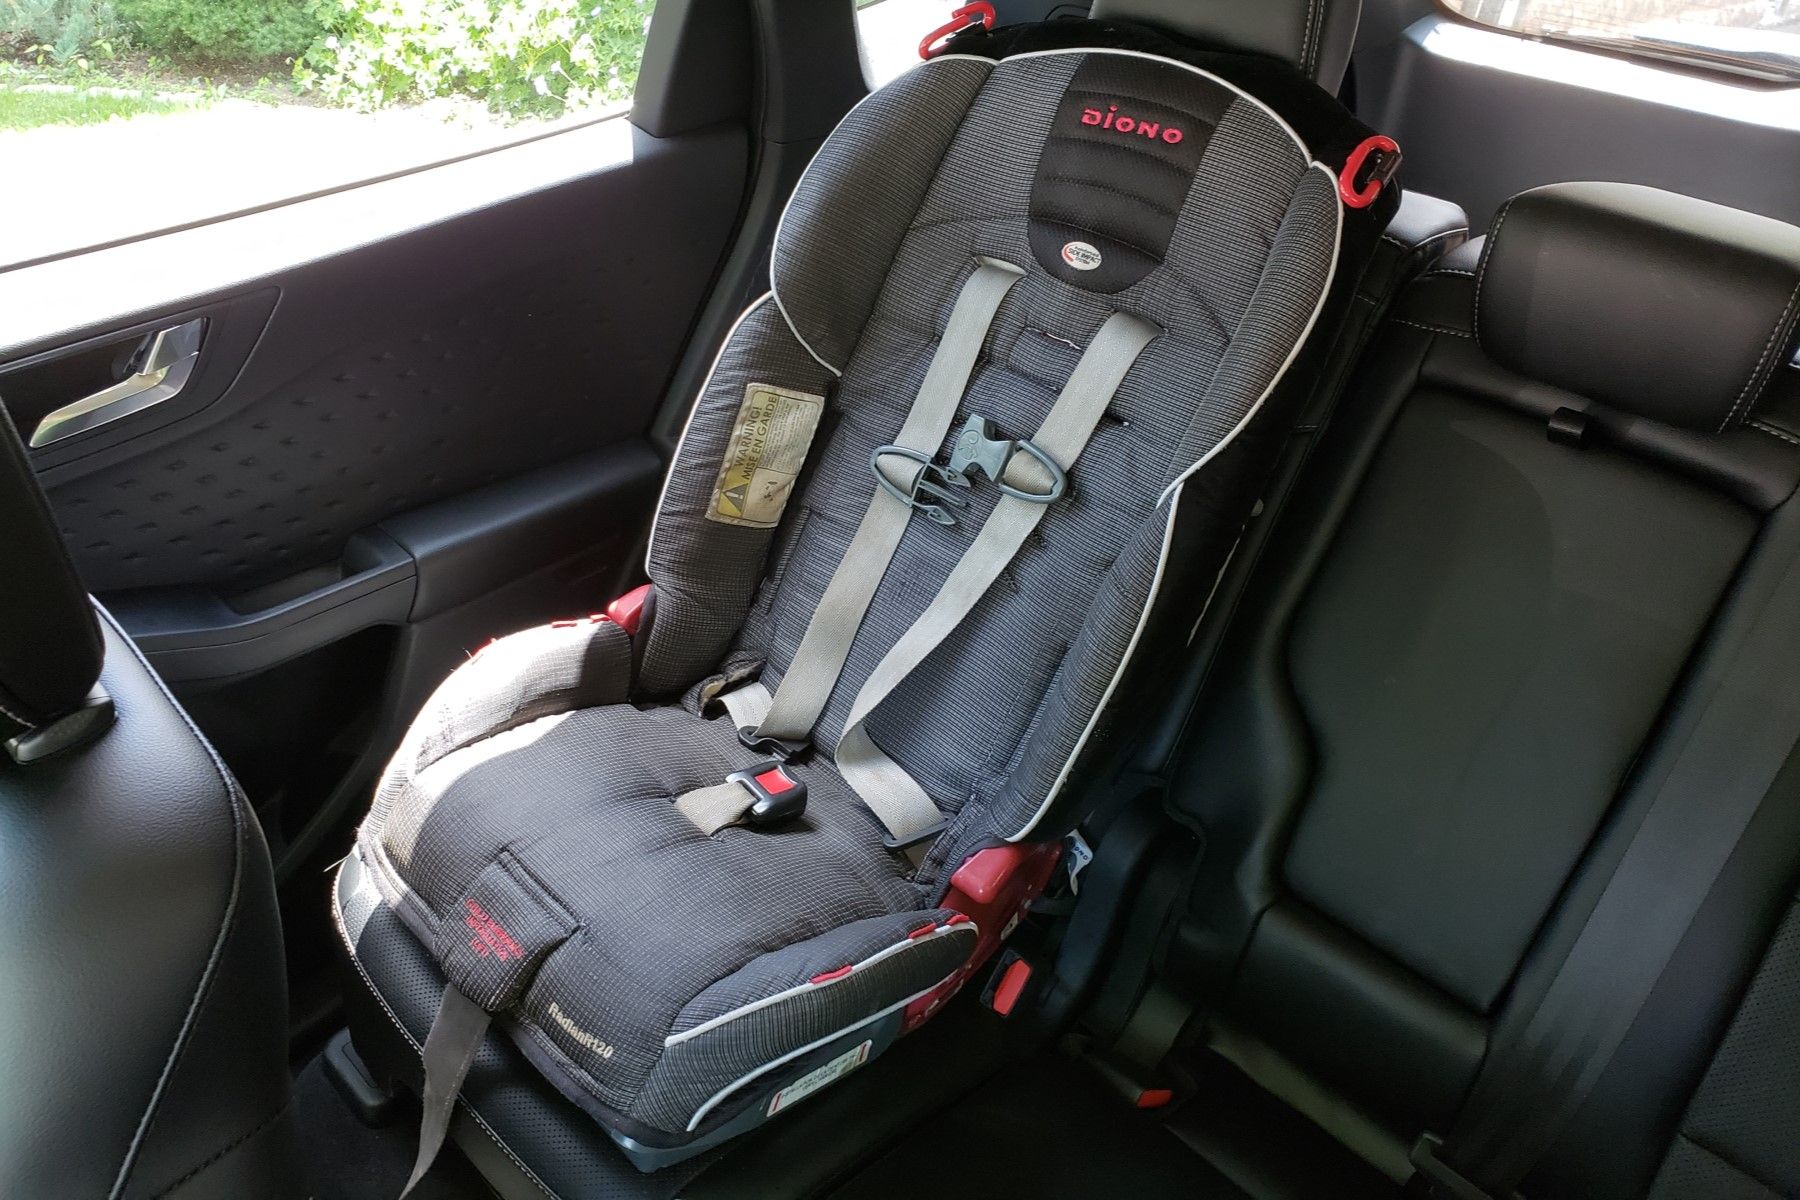 4 reasons you should avoid buying a second-hand car seat